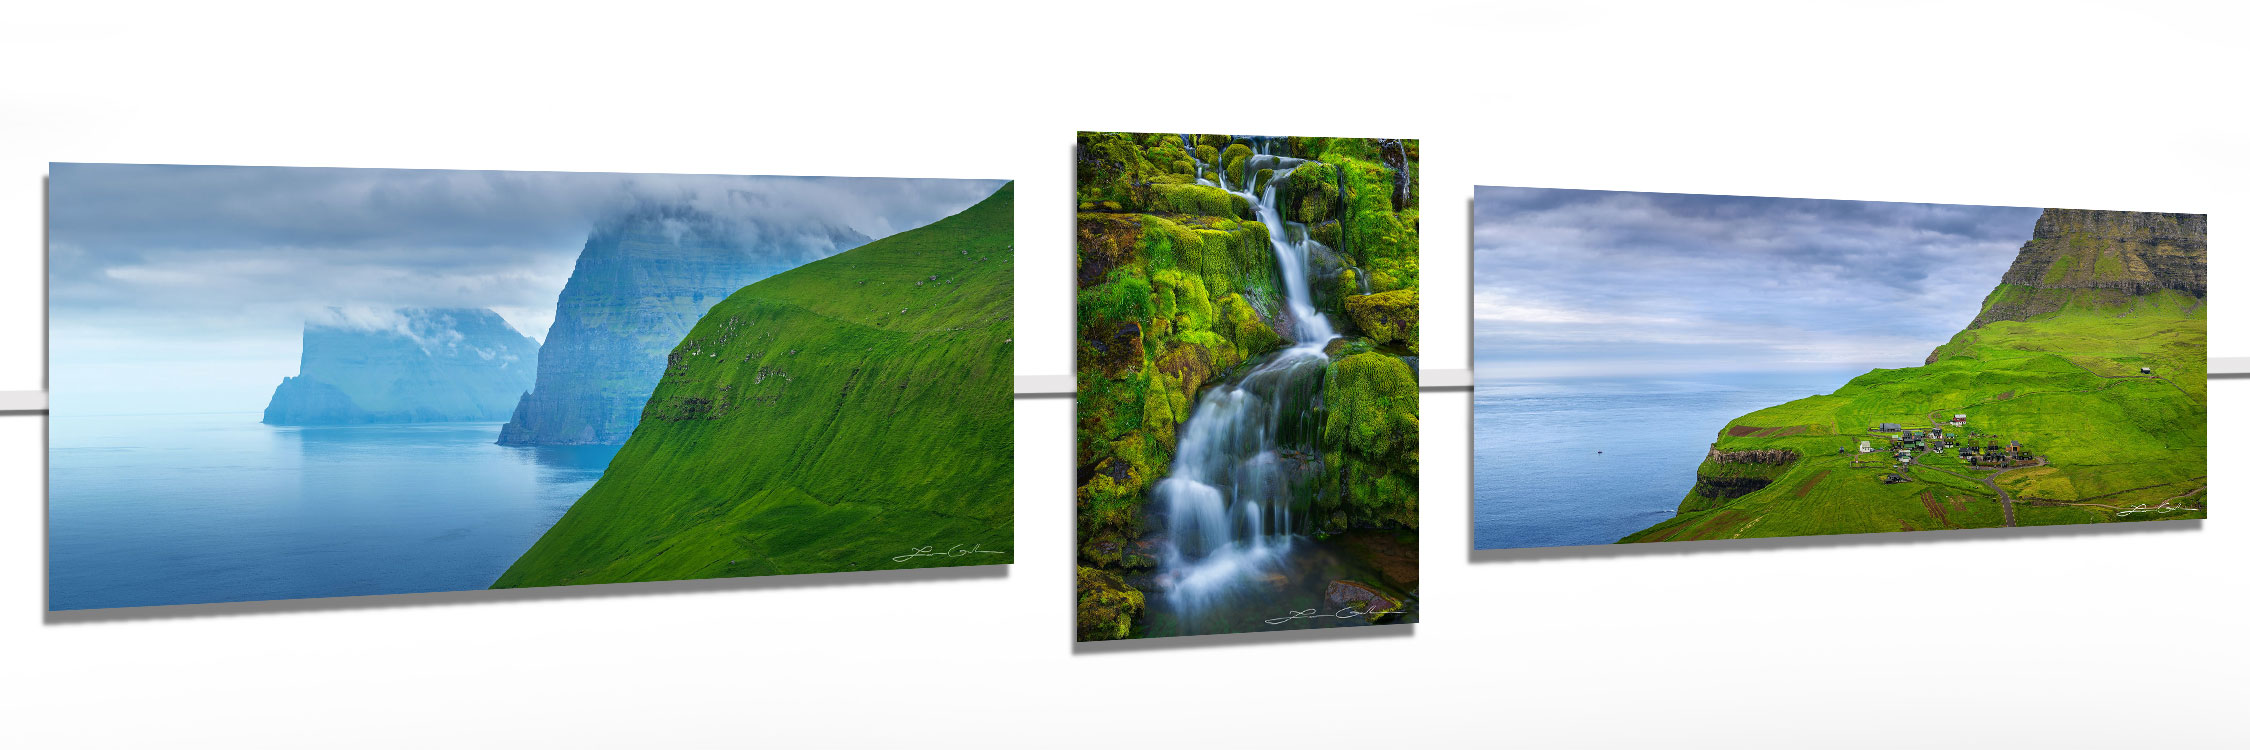 A panoramic image of a gallery wall with three fine art prints of the Faroe Islands - Gintchin Fine Art